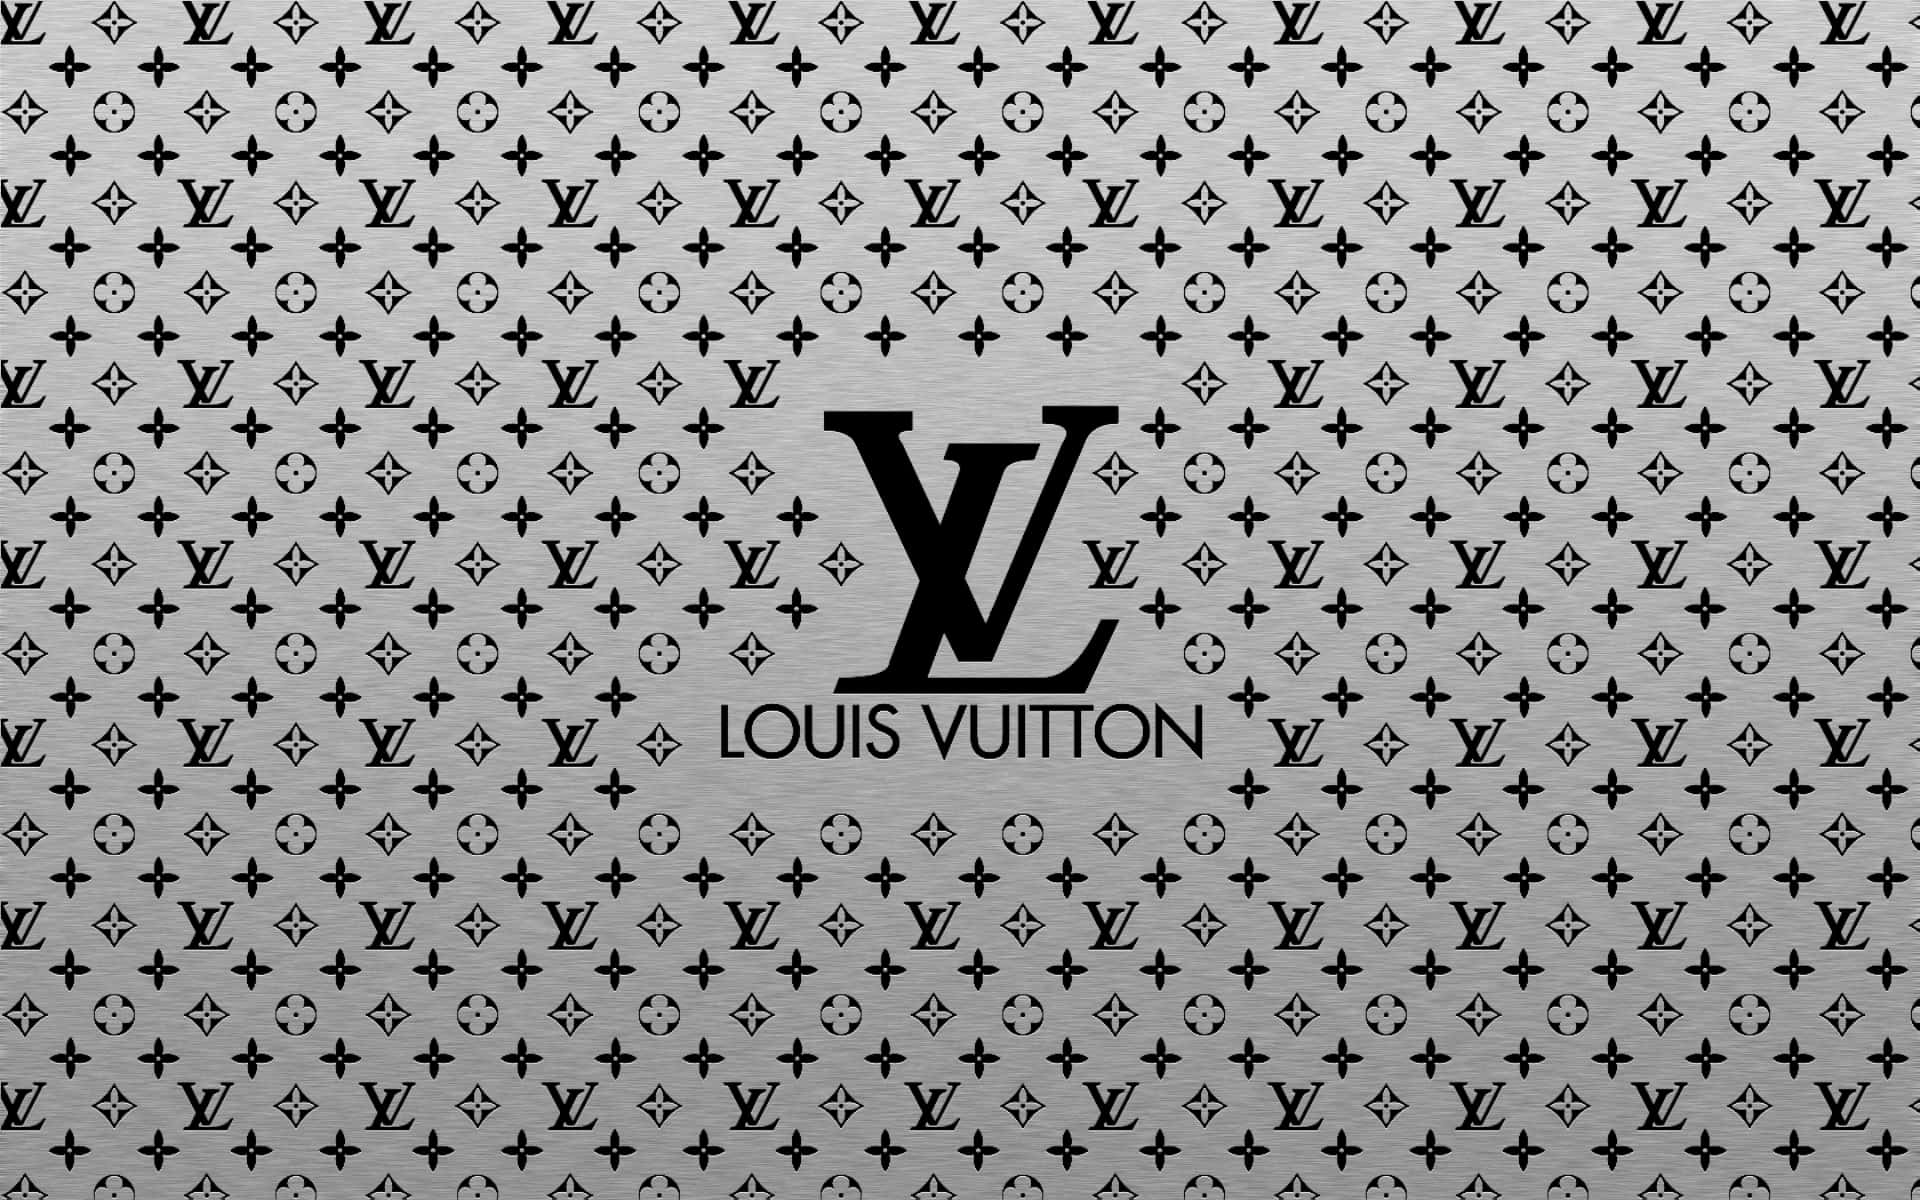 Download Inspire your wardrobe with Louis Vuitton's iconic pattern